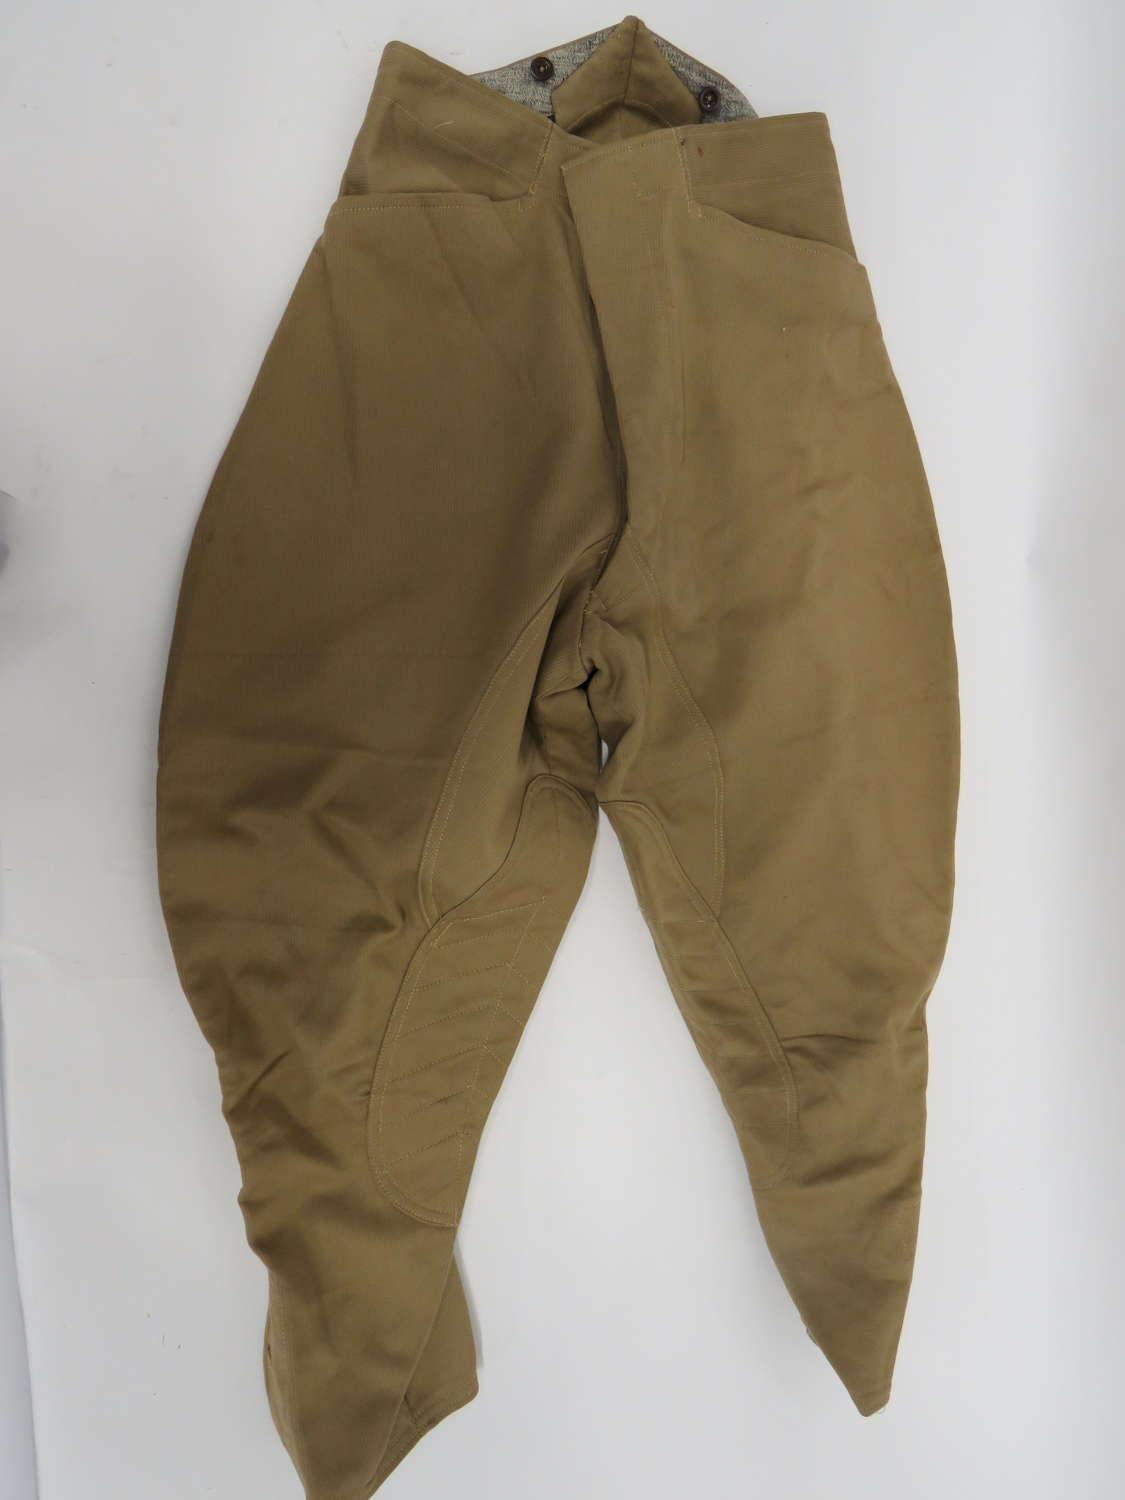 Pair of Indian Made WW 2 Cavalry Breeches